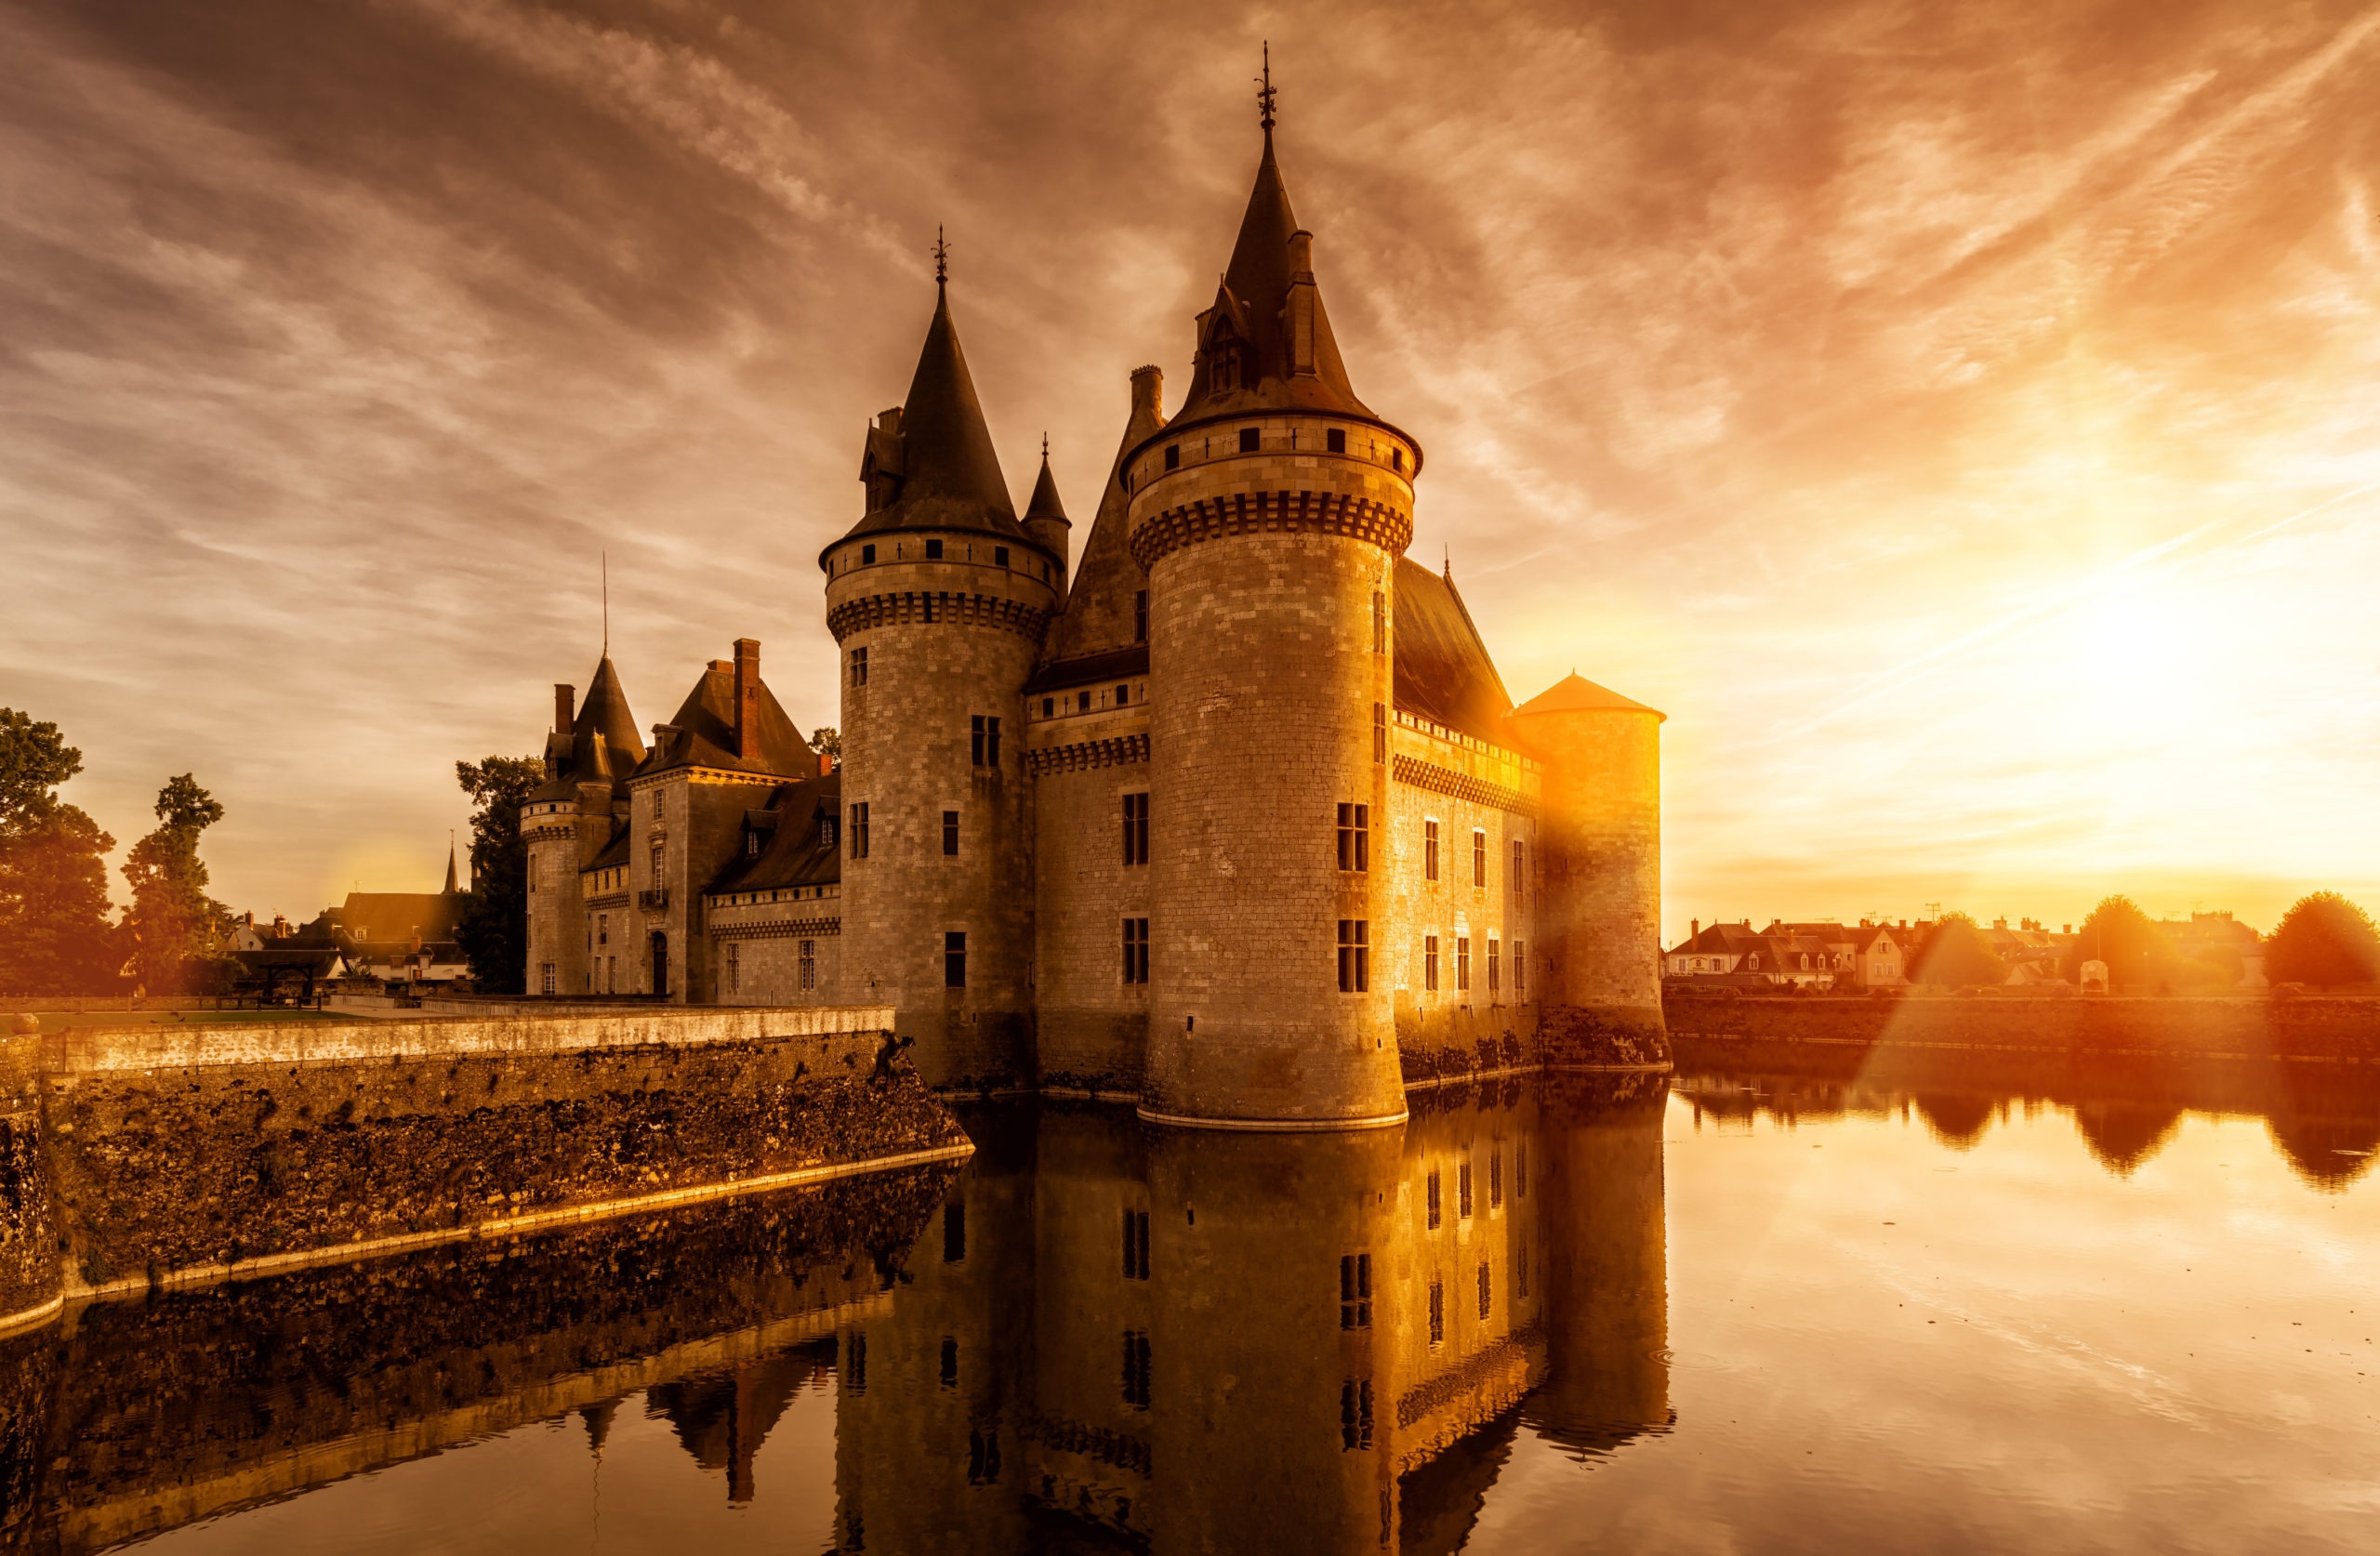 The chateau of Sully-sur-Loire at sunset, France